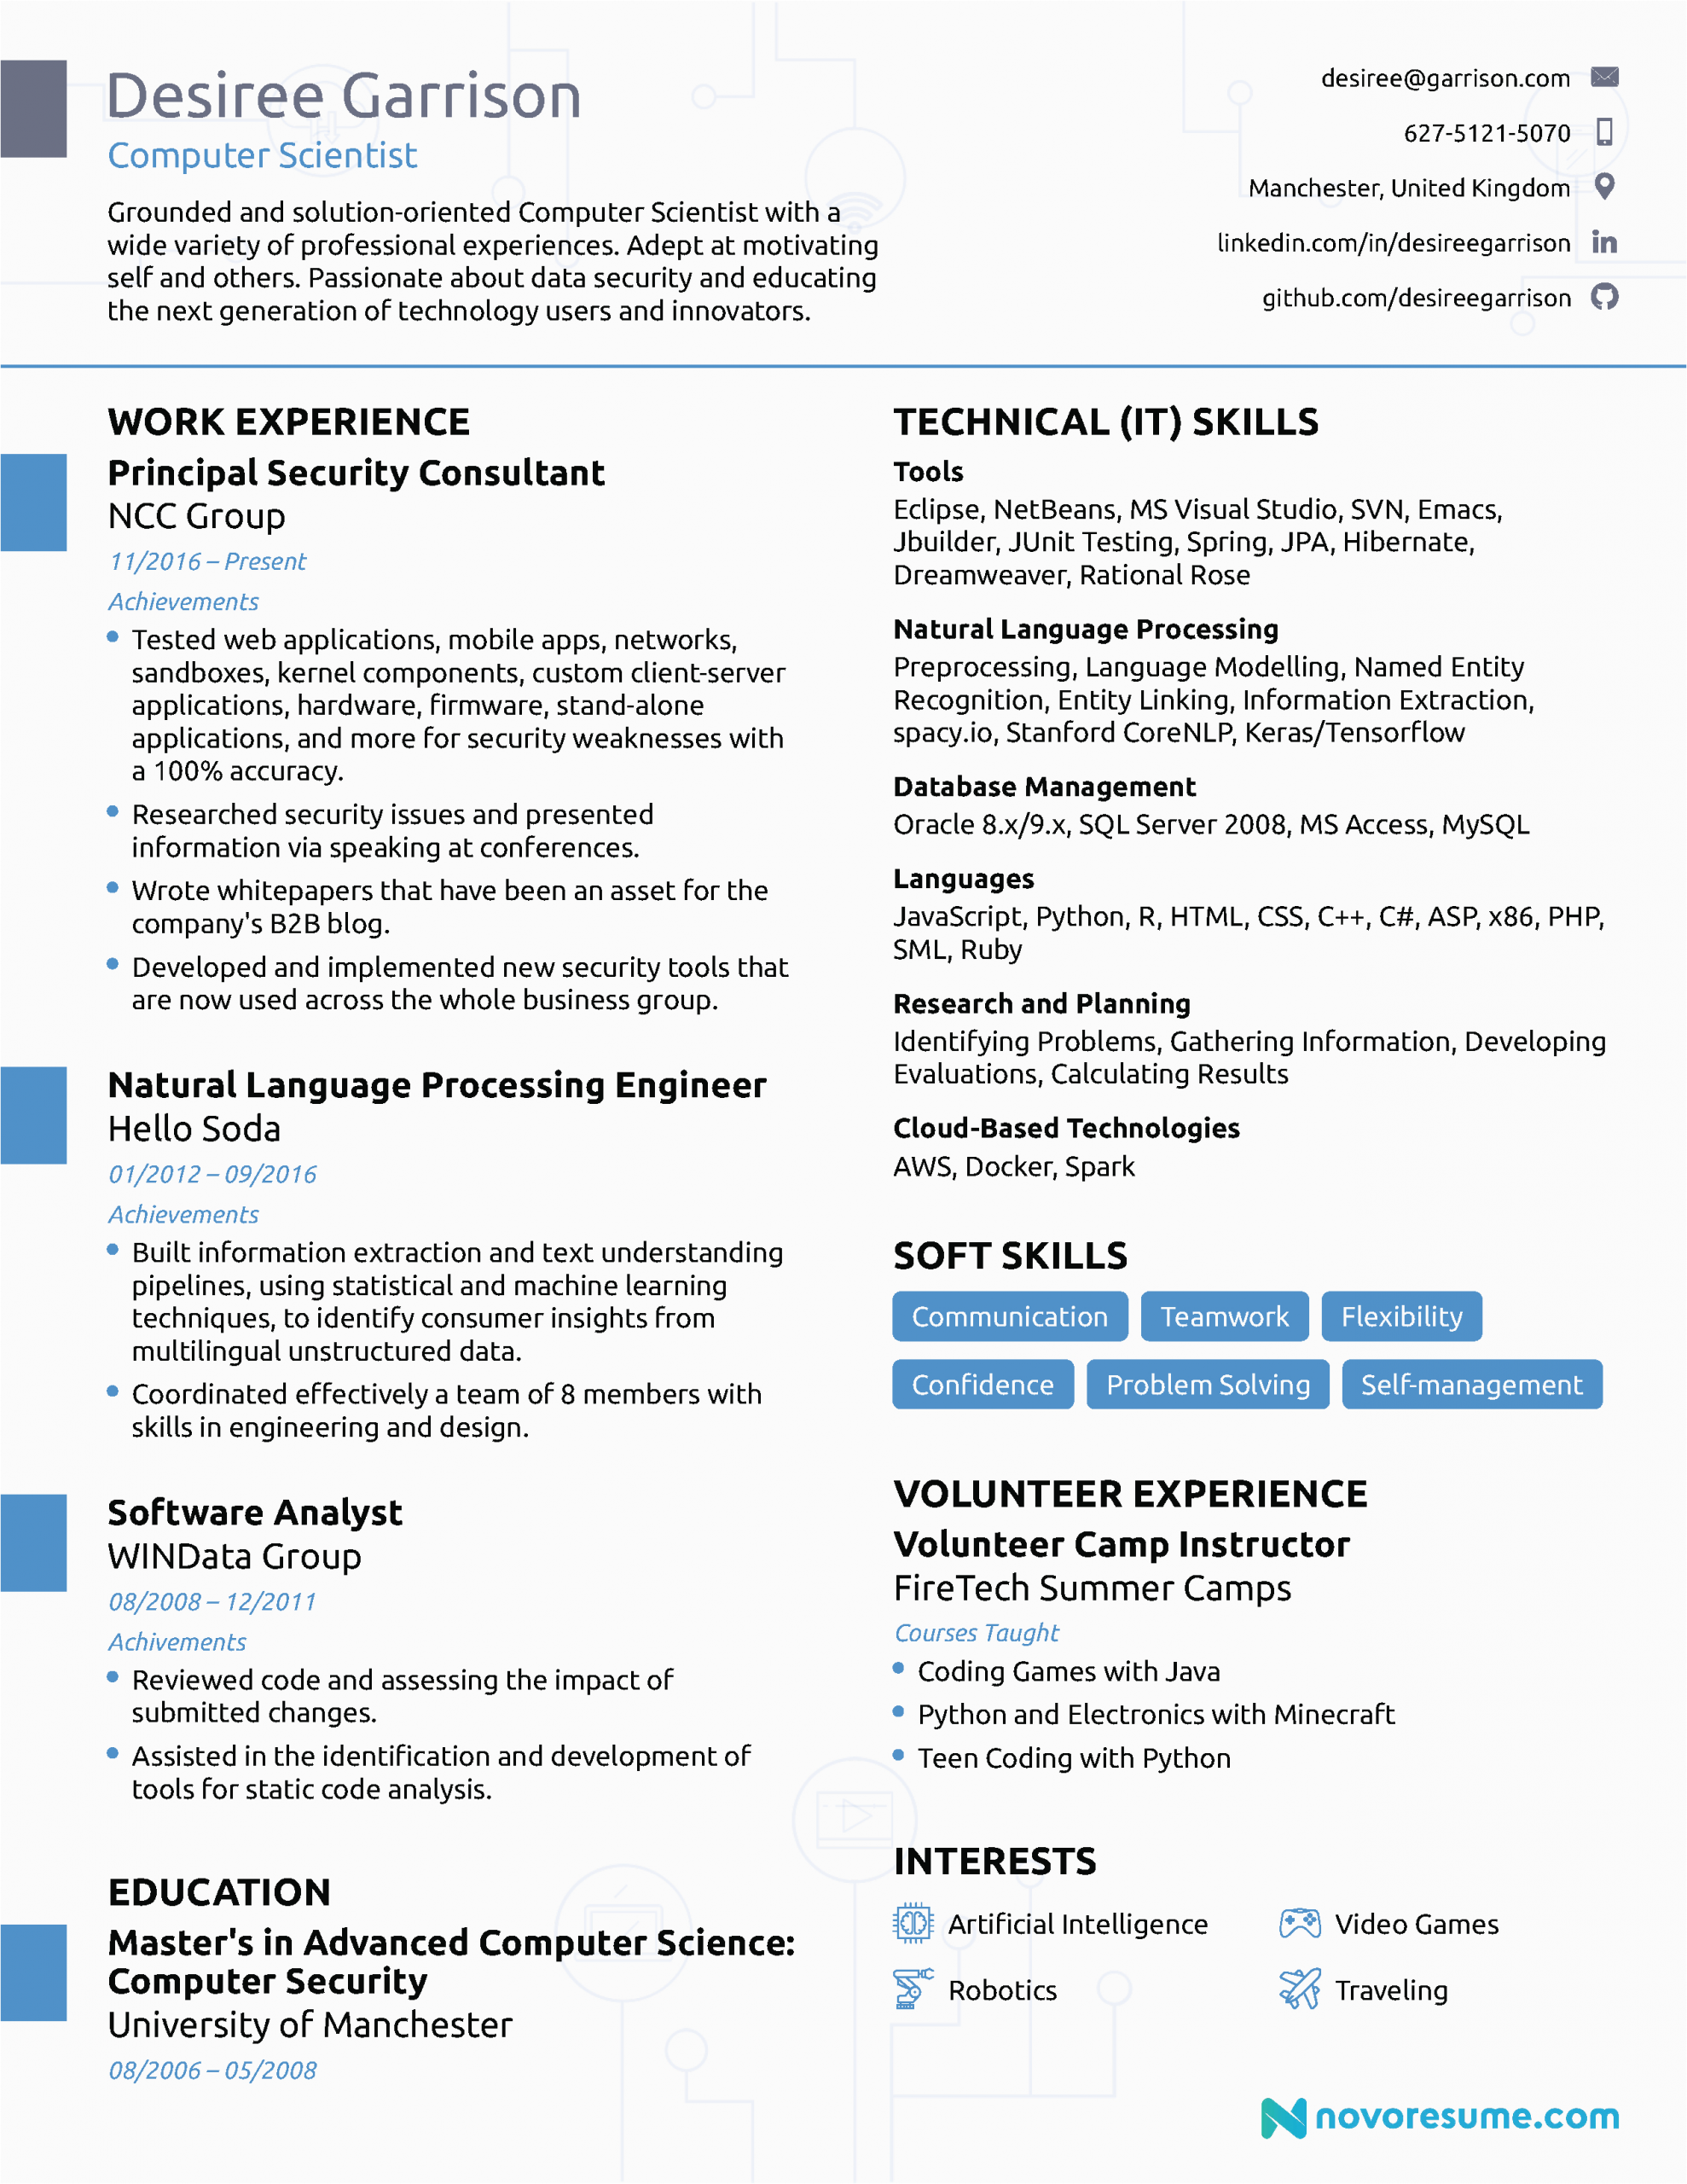 Resume Samples for Computer Science Engineers Puter Science Resume [2020] Guide & Examples